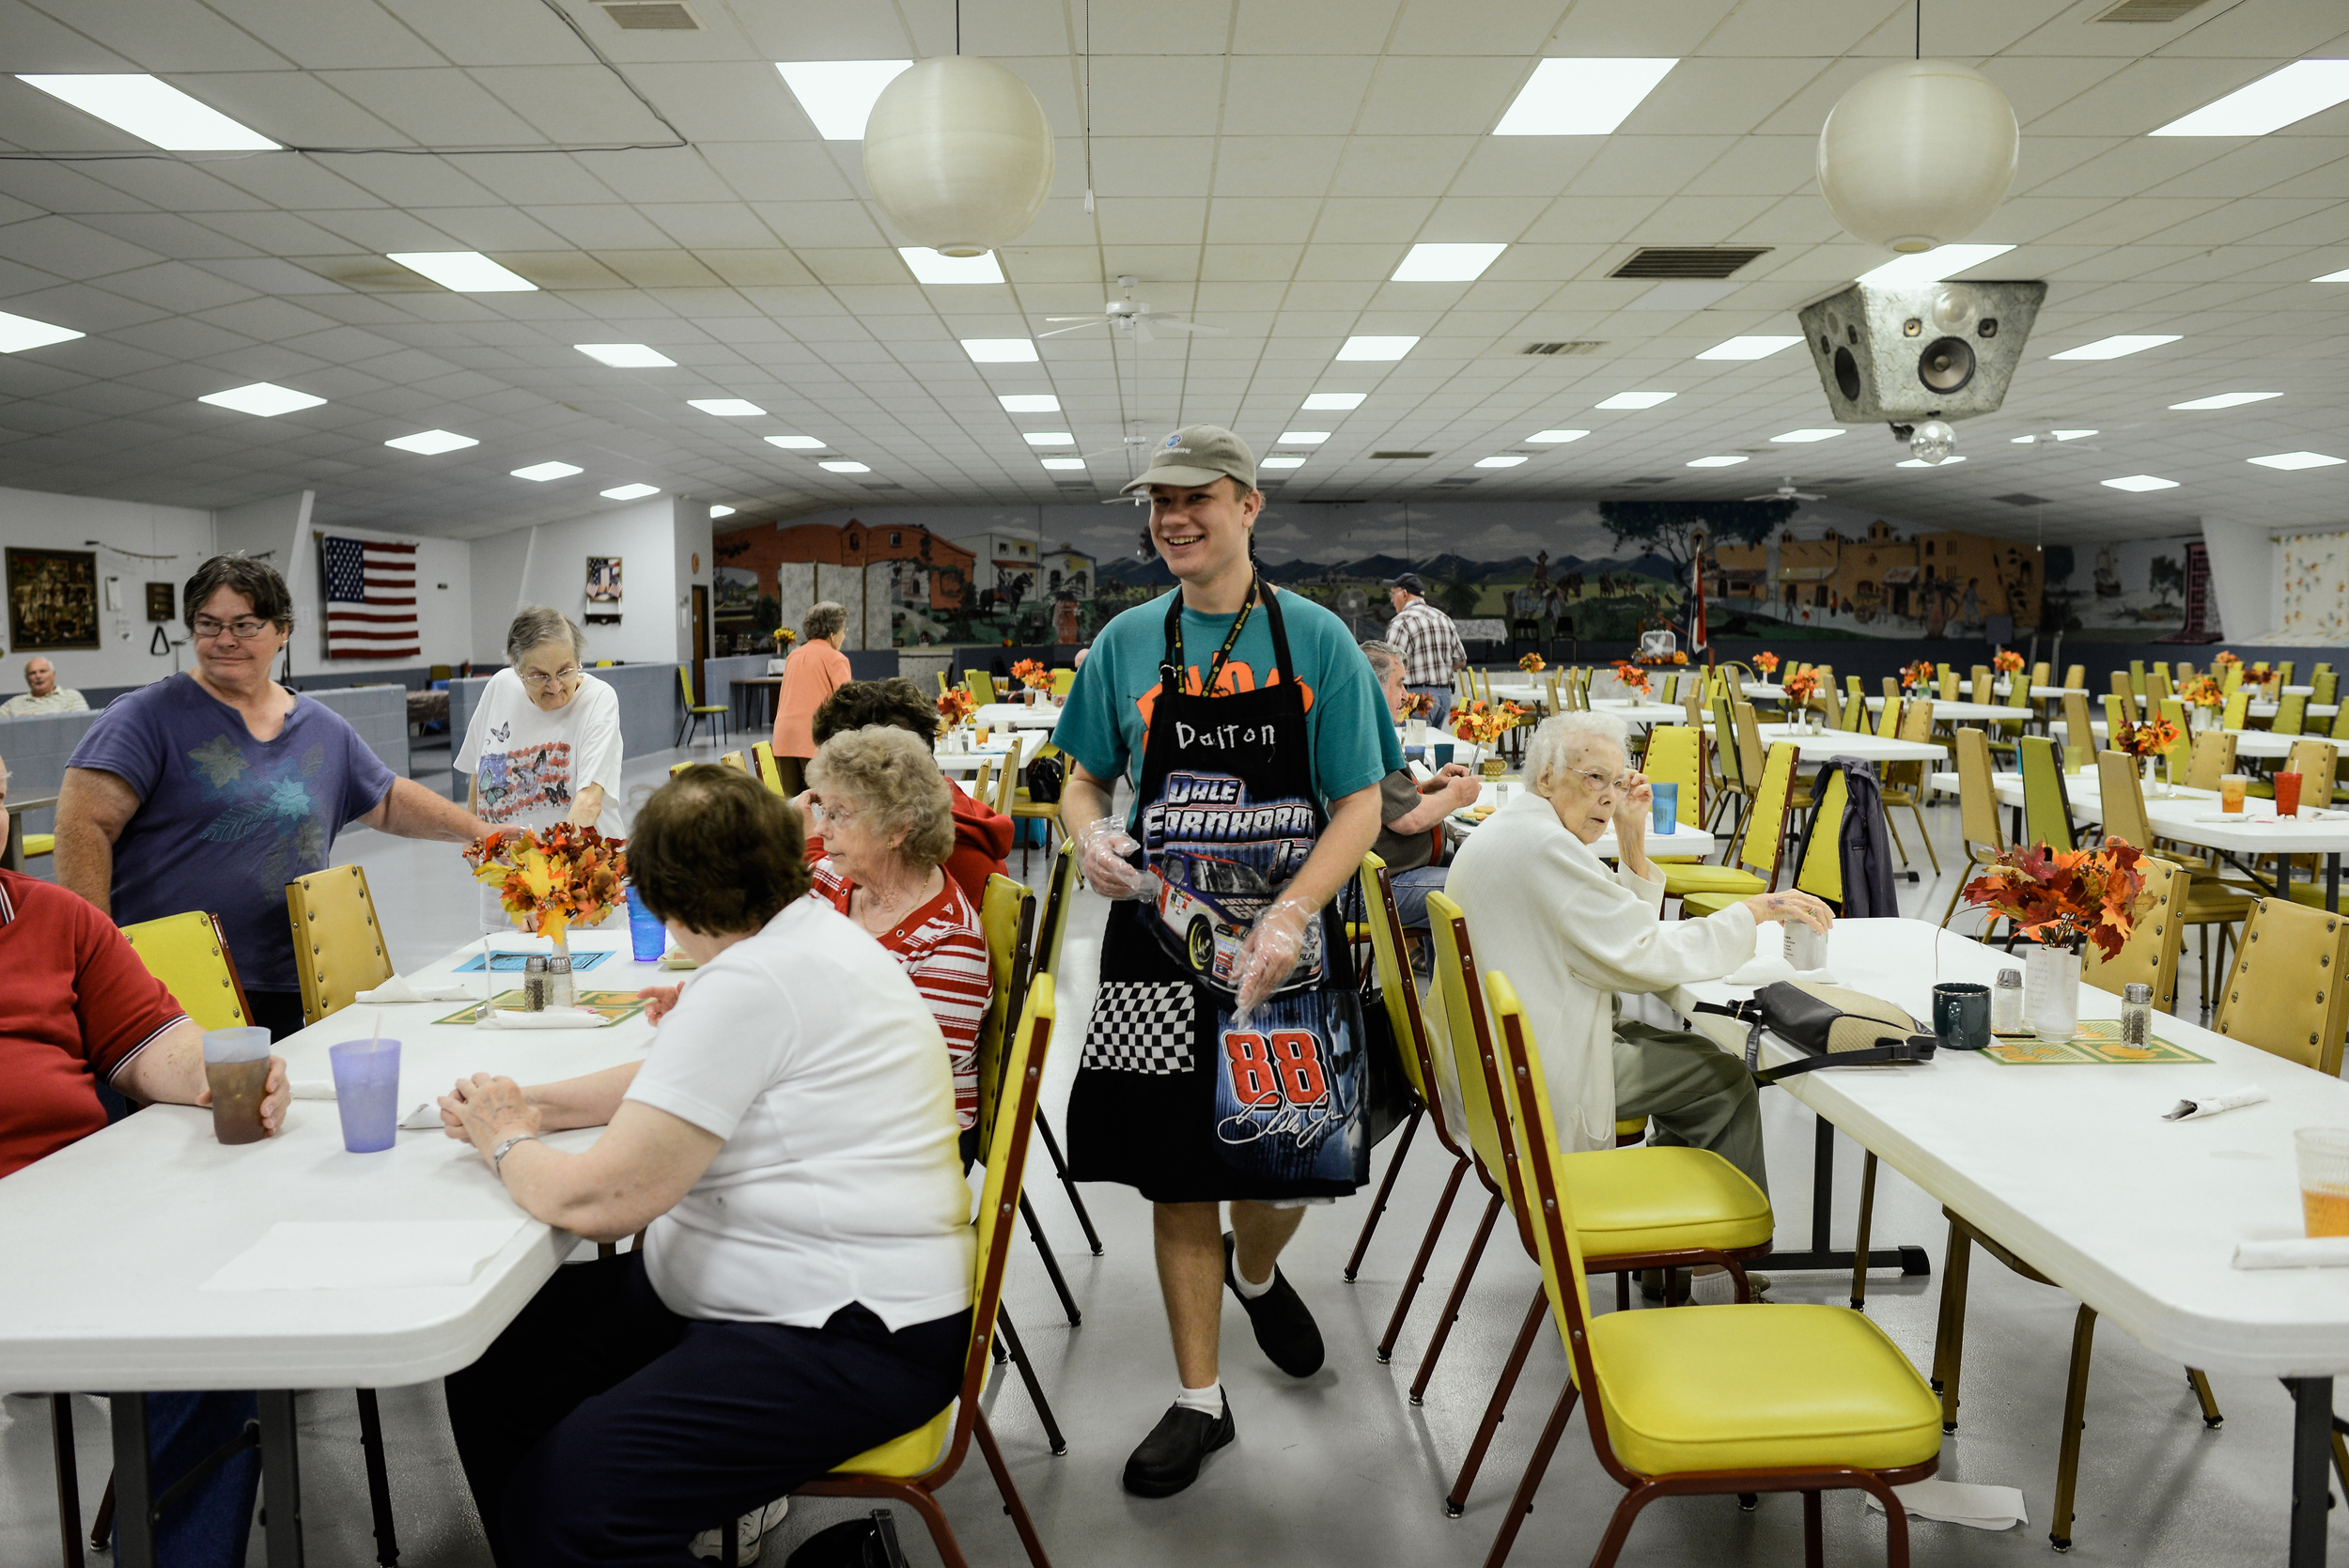  Trenton, Missouri. 2013.  Dalton helps serve lunch at the local senior center. He volunteers multiple times a week because he enjoys interacting with different members of the community. 